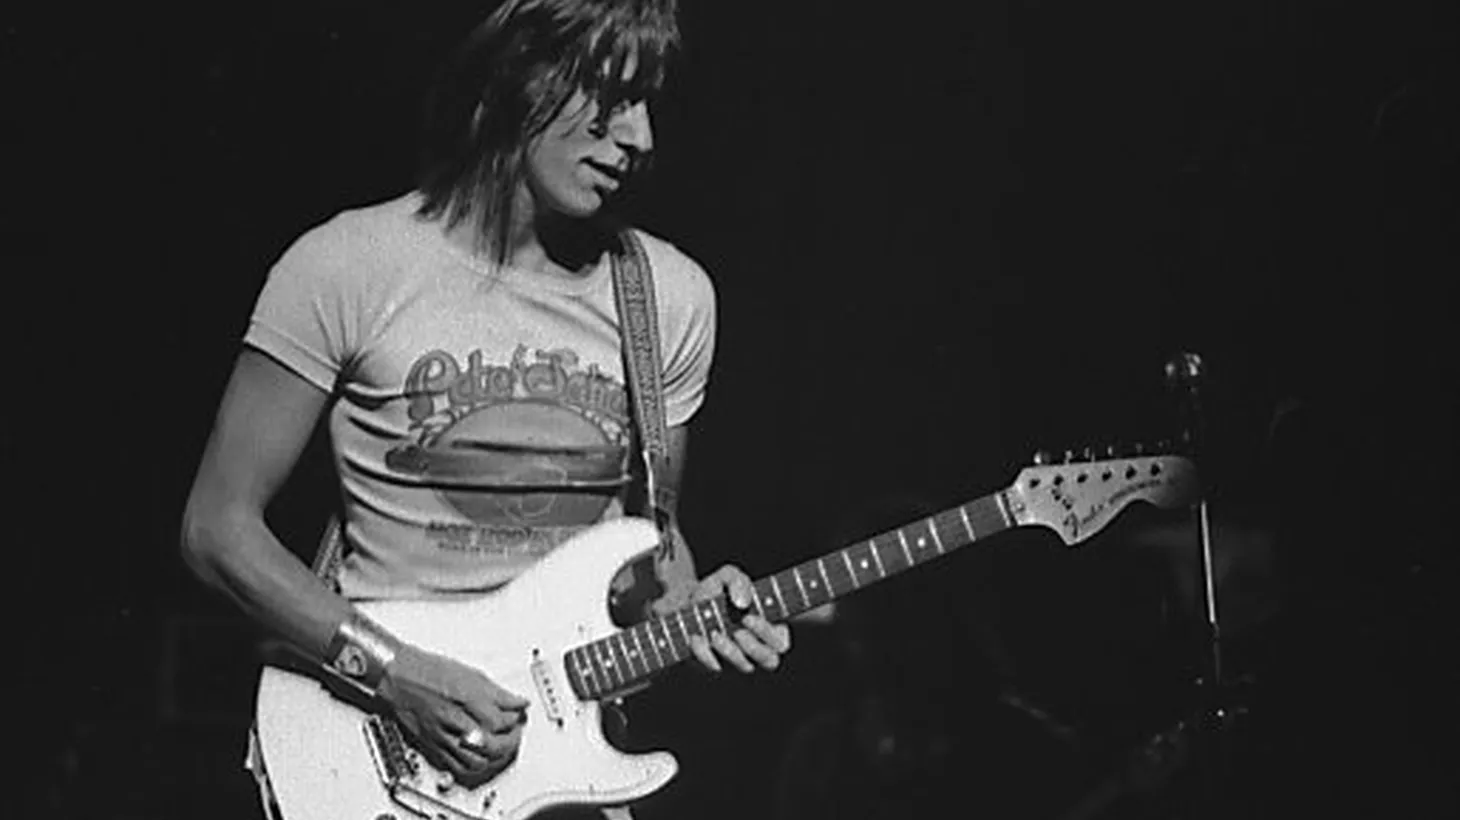 Guitarist Jeff Beck was inducted twice into the Rock and Roll Hame of Fame — once with The Yardbirds and once on his own.